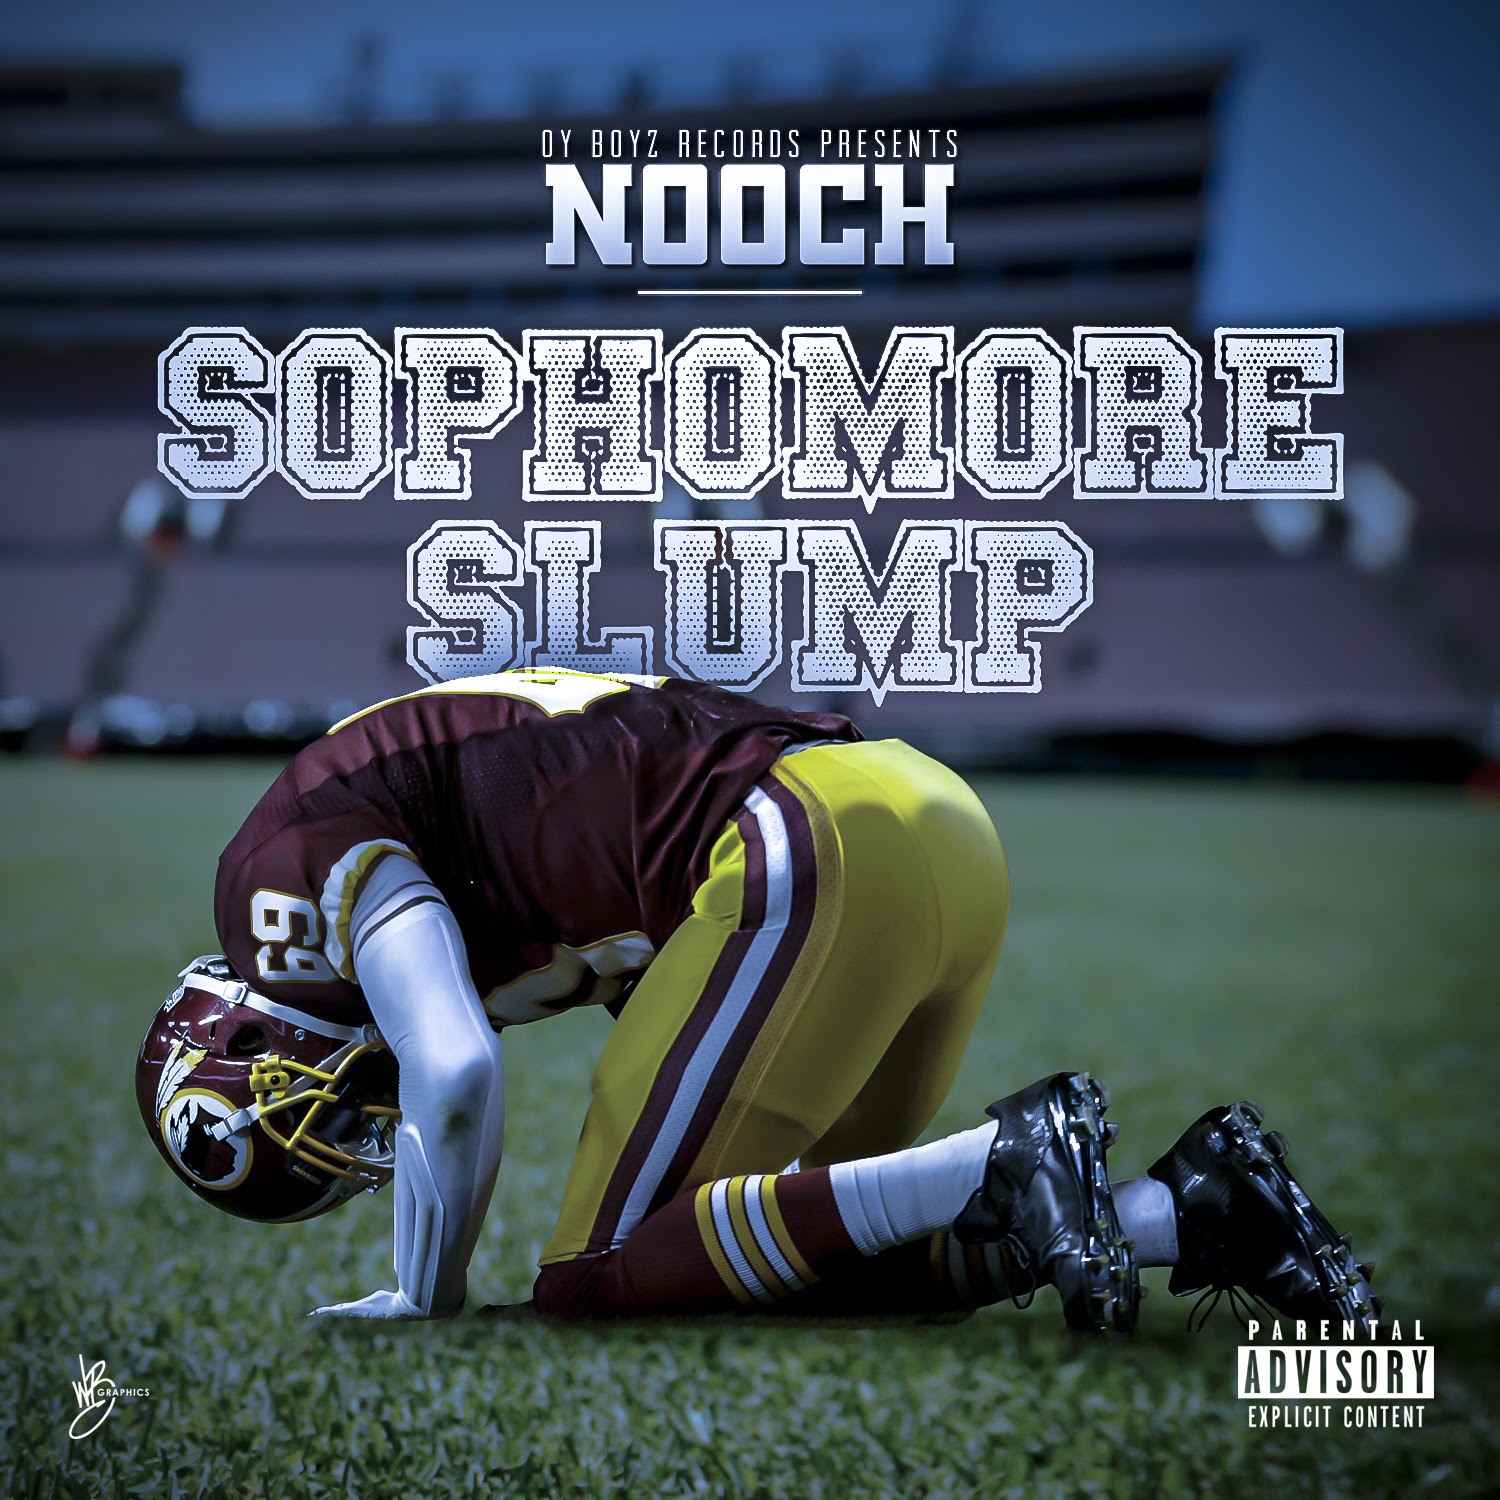 Nooch: How Real Feat. Paul Wall